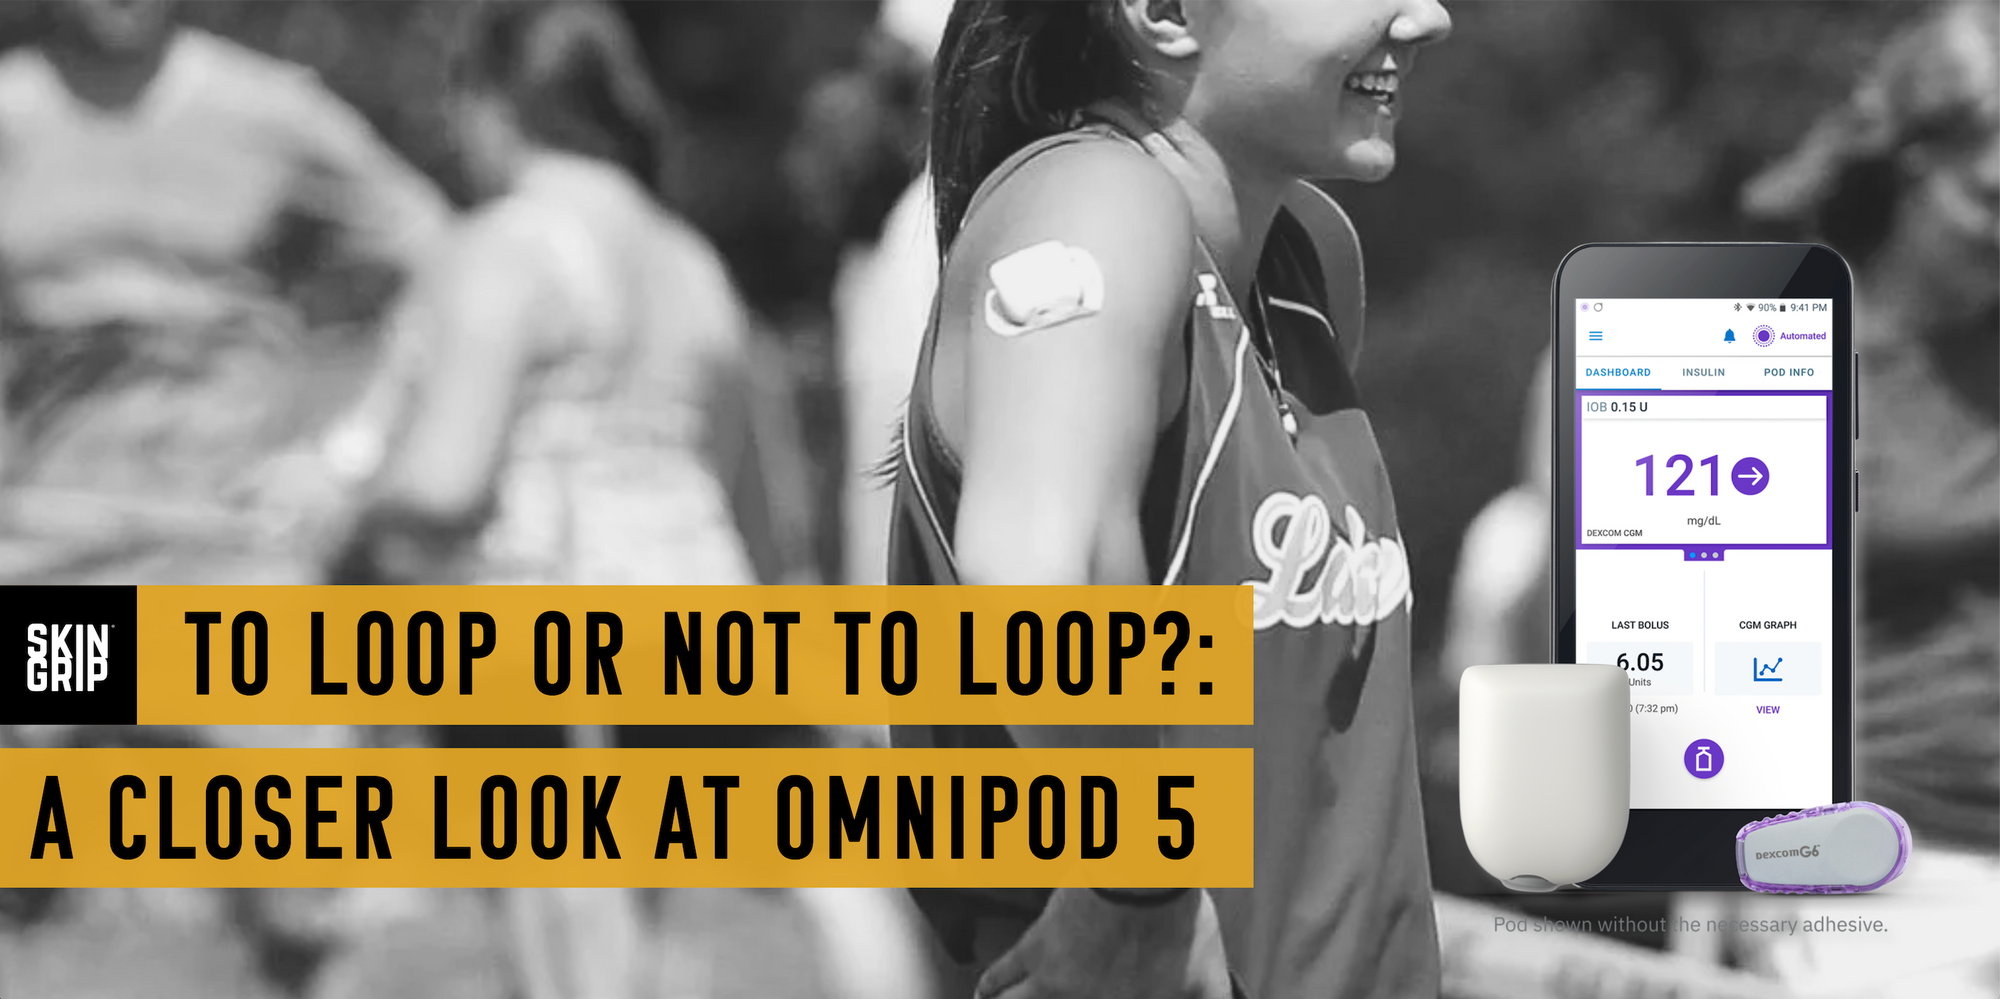 To Loop or Not to Loop?: A Closer Look at Omnipod 5